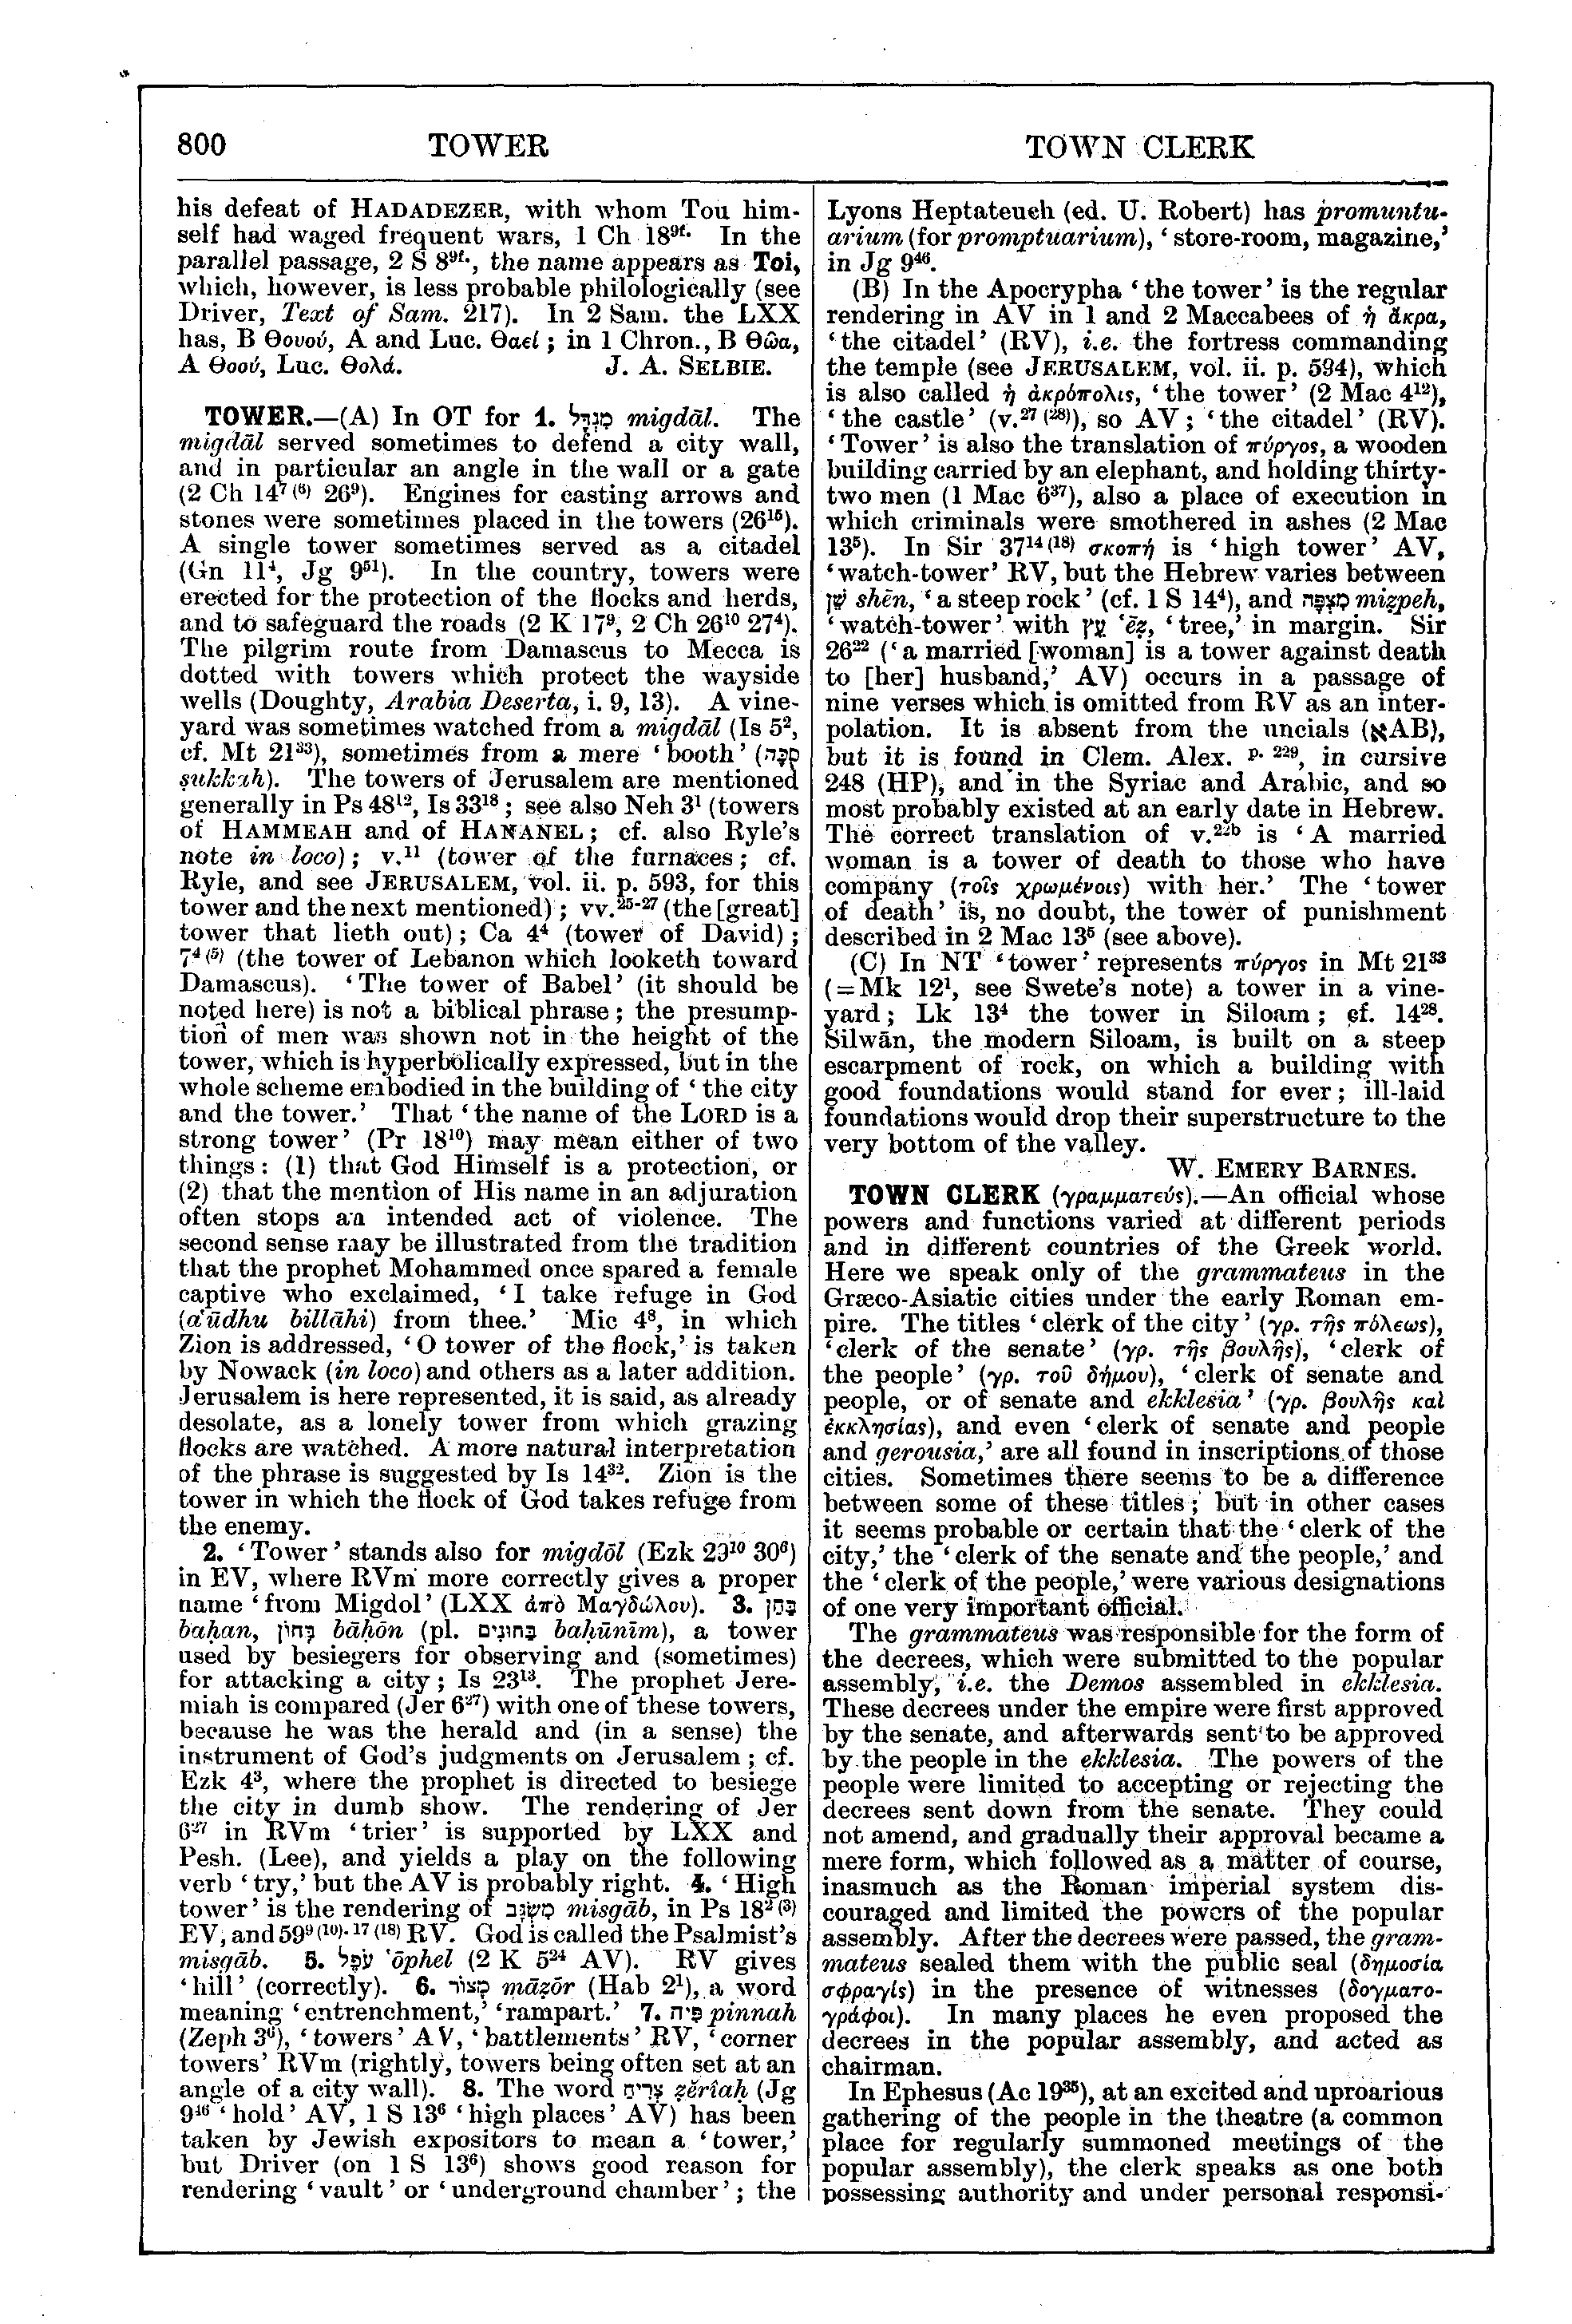 Image of page 800